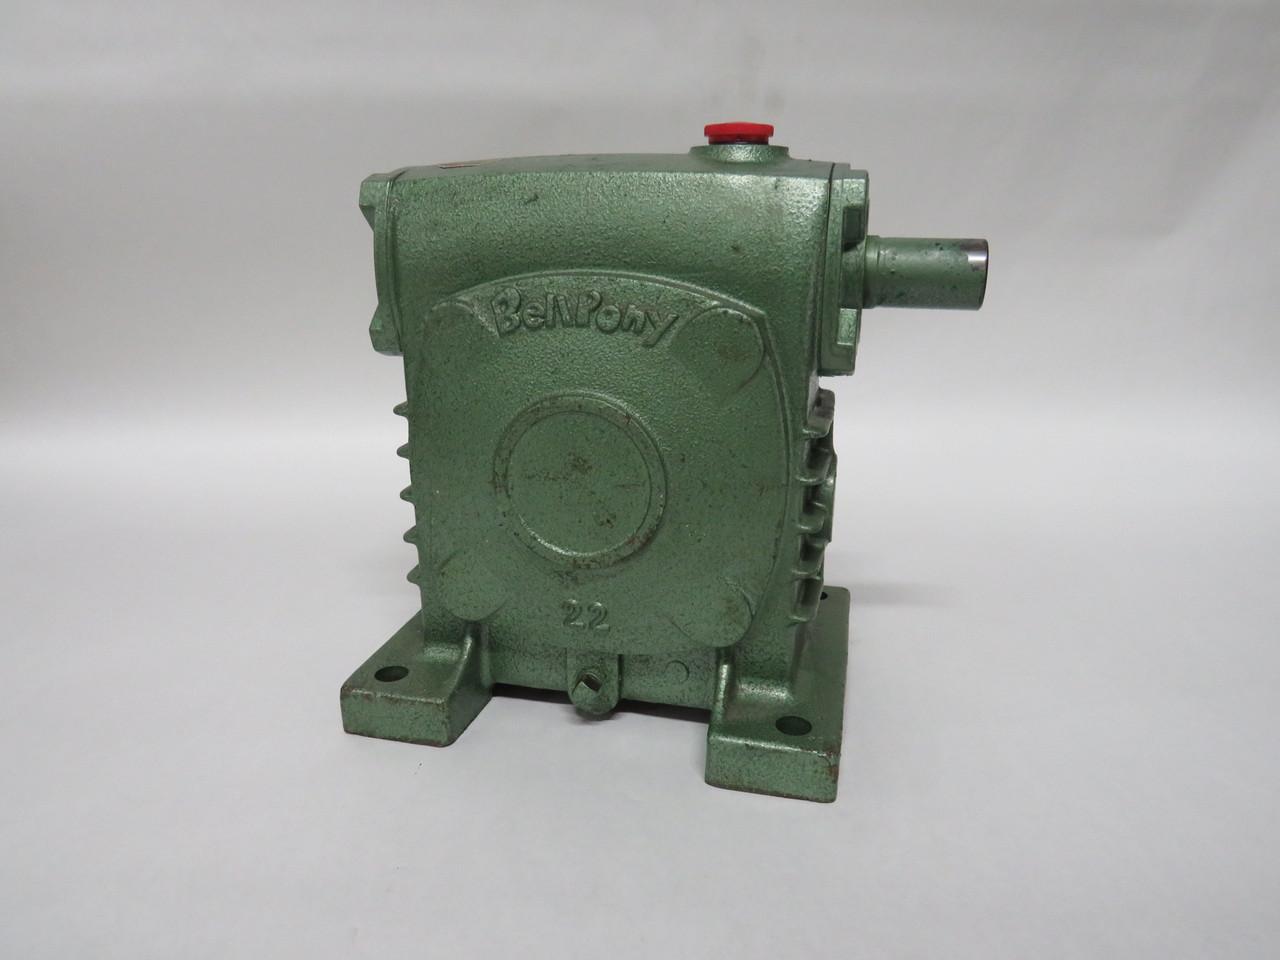 BellPony J82403 Gear Reducer Right Angle Gearbox Type PR-22 1:60 Ratio USED